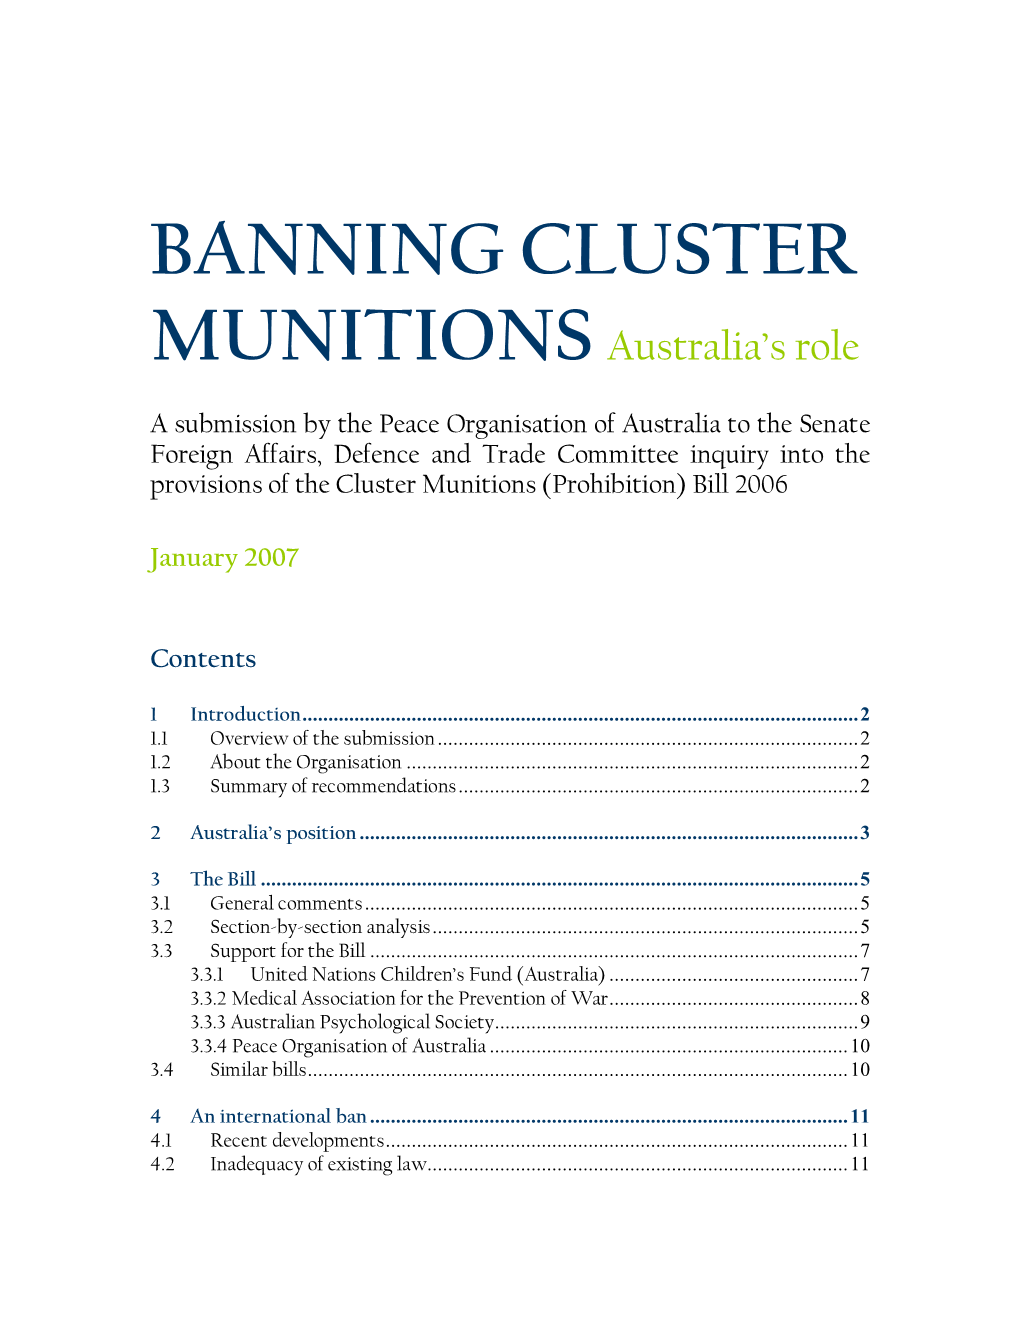 Cluster Munitions (Prohibition) Bill 2006